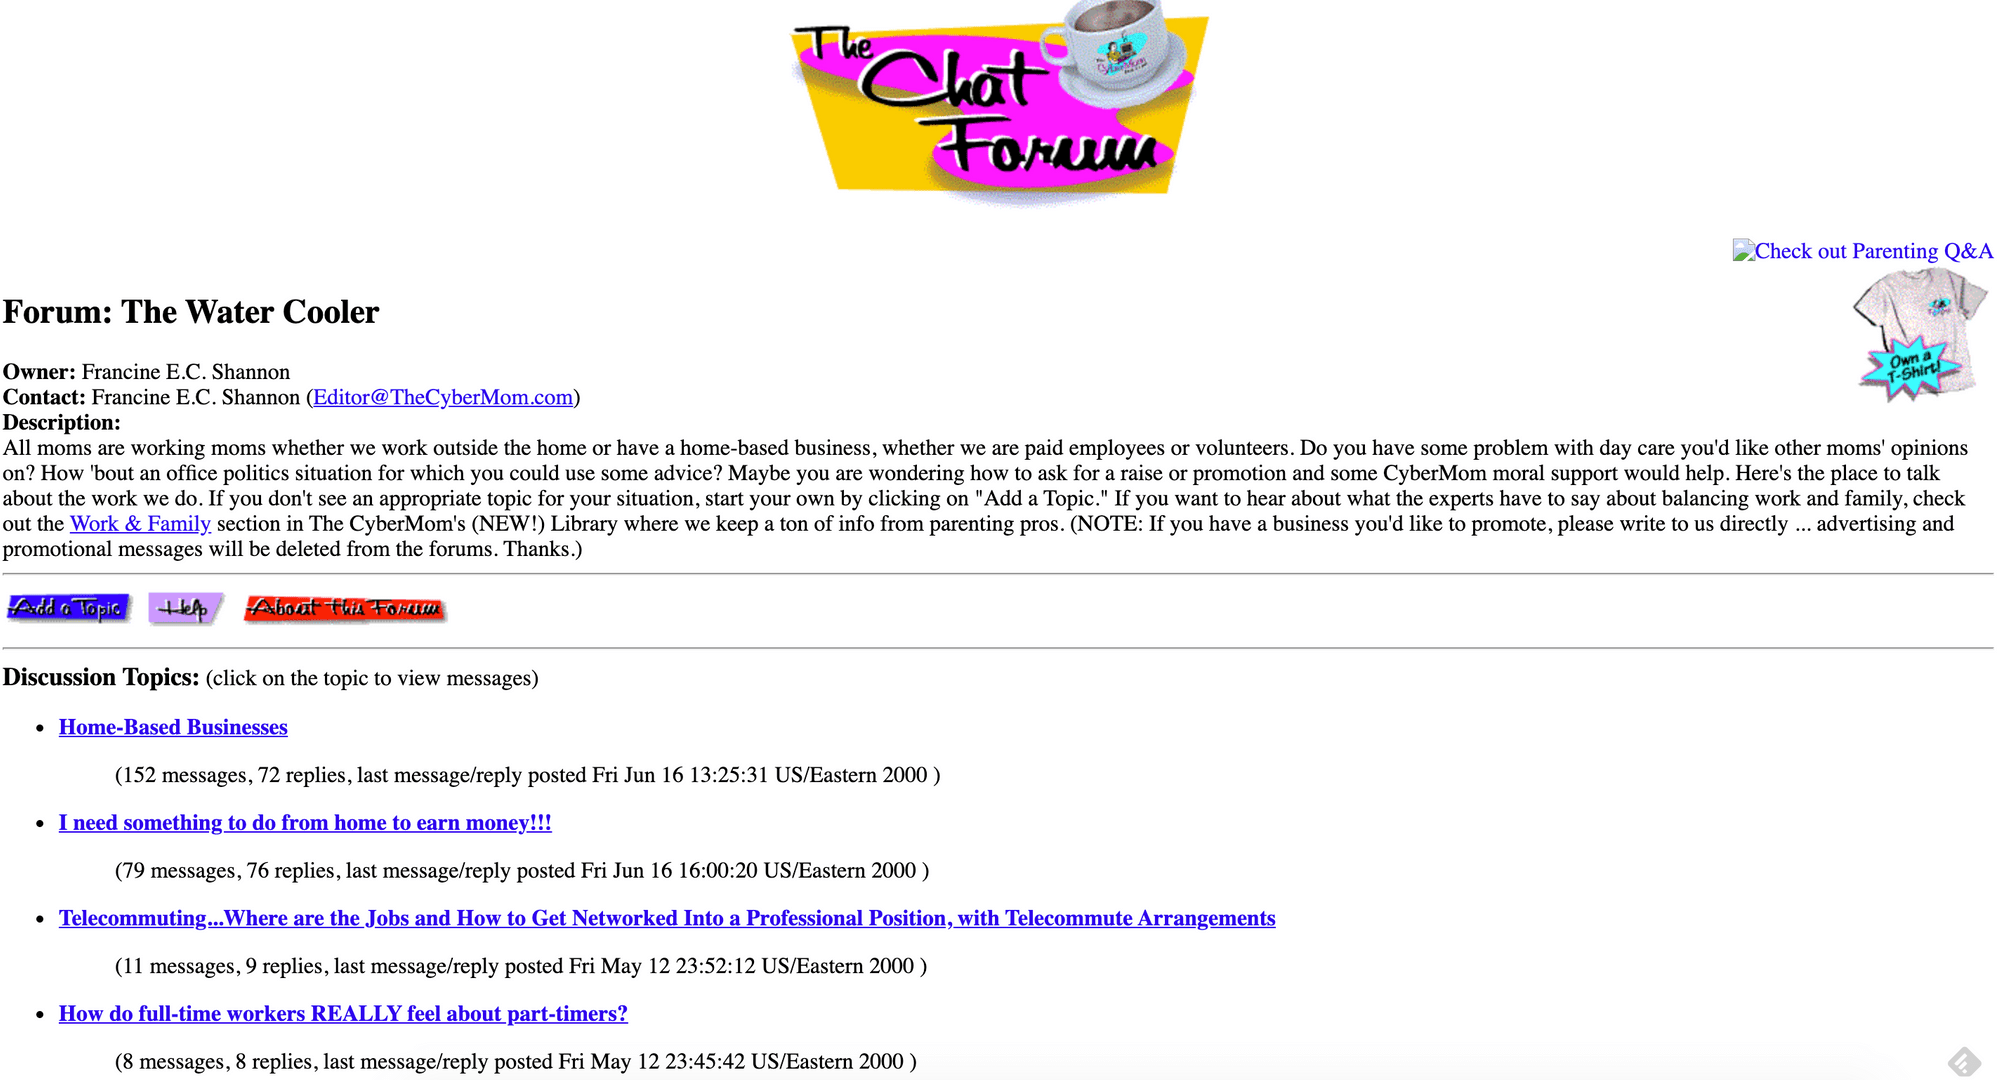 An example of a forum bulletin board online community in the 1990s and 2000s